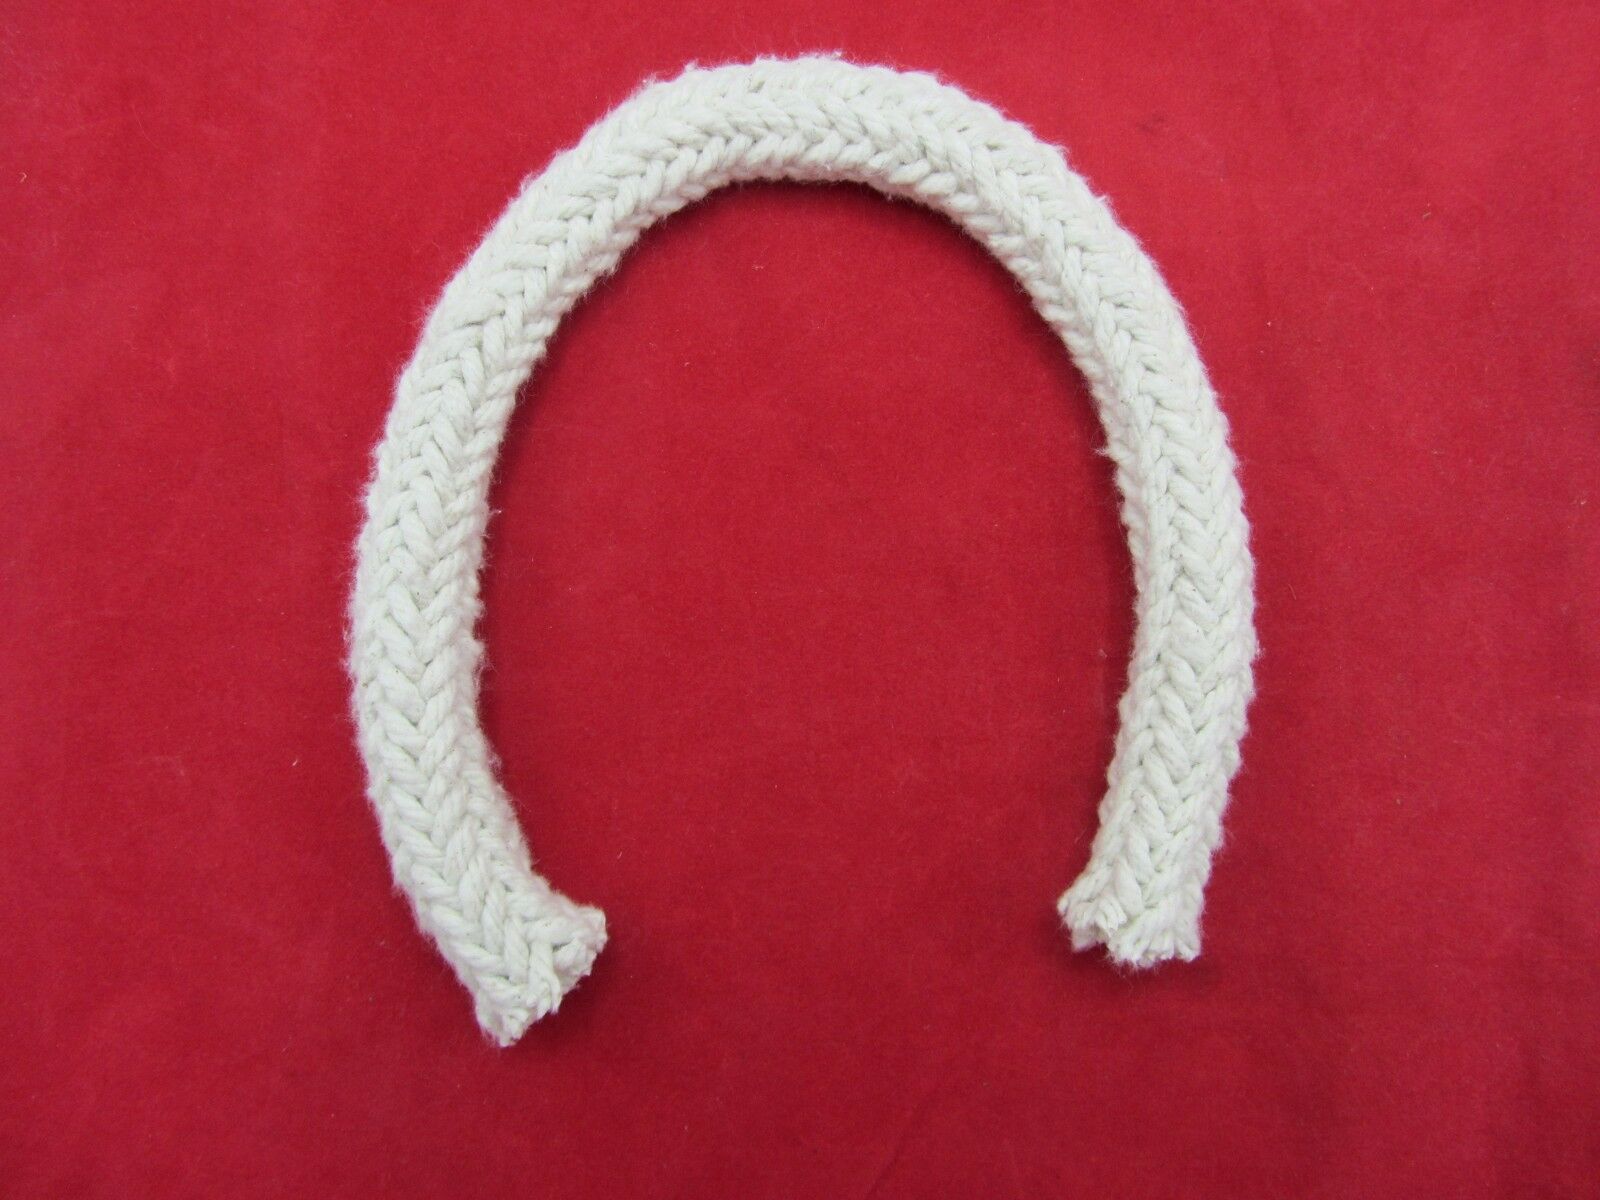 Braided Cotton Round Rope Wick 3/4" X 16" For Smudge Pot Oil Lamp Torch New